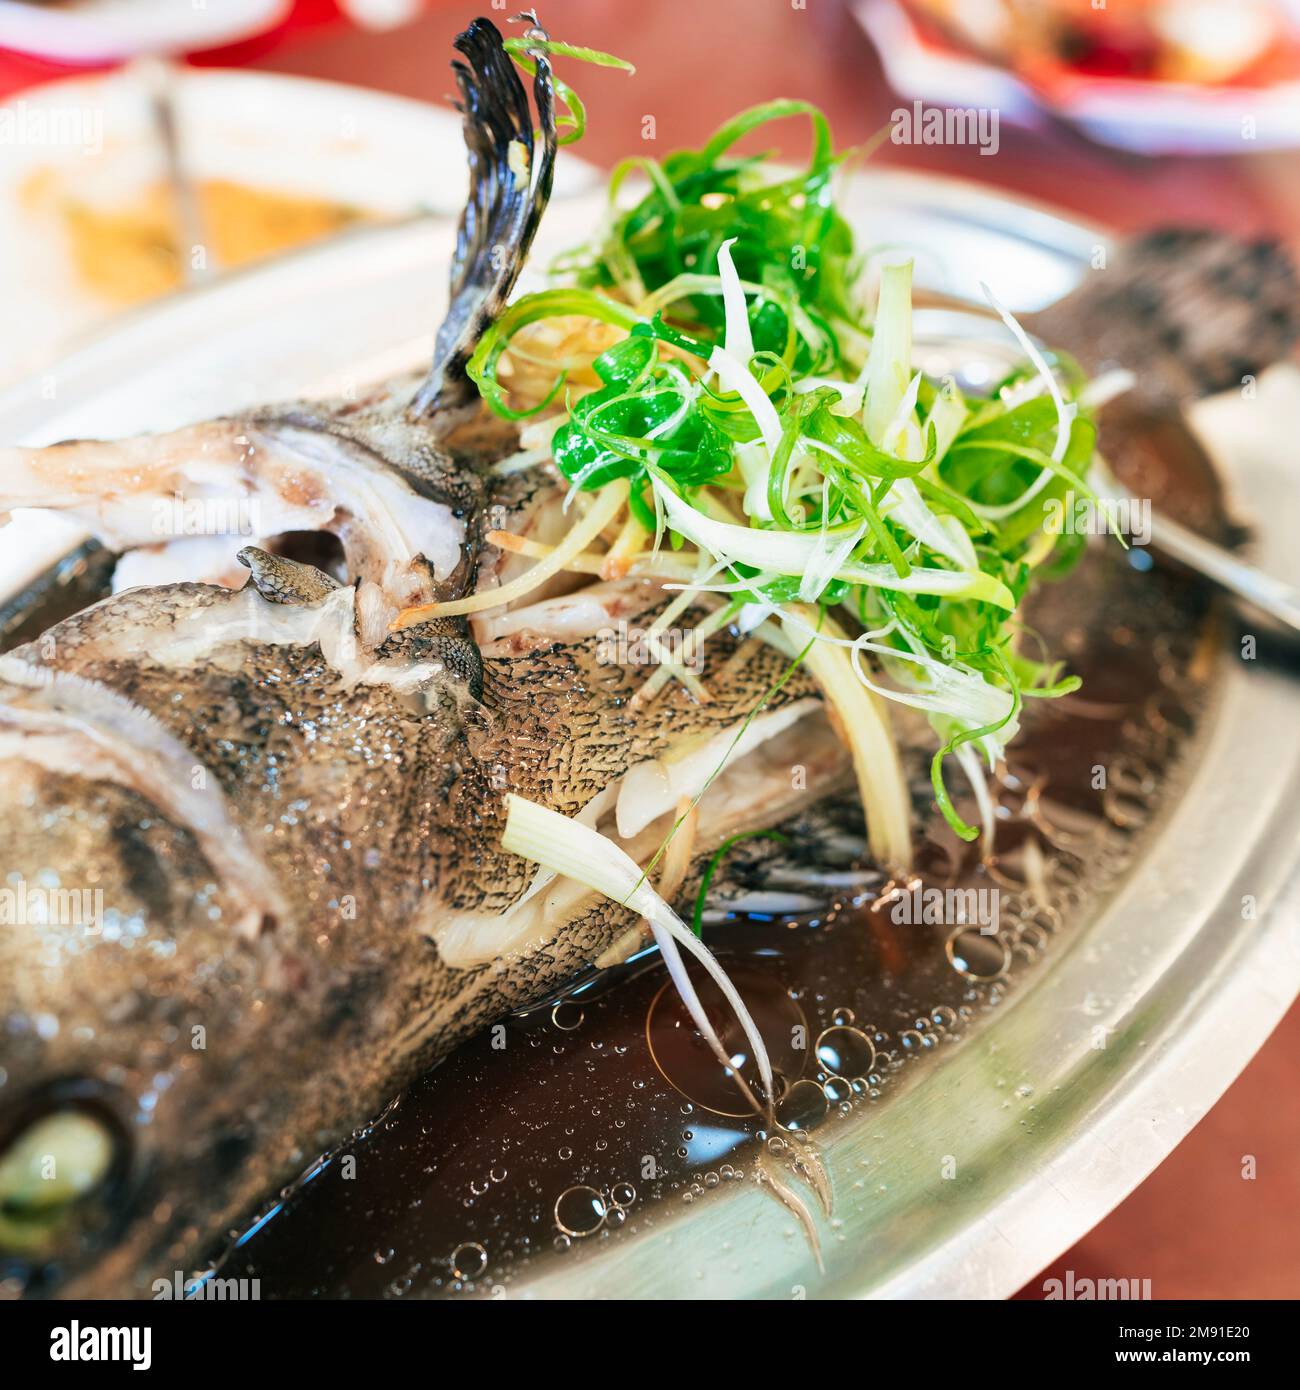 Steamed fish in a plate Stock Photo